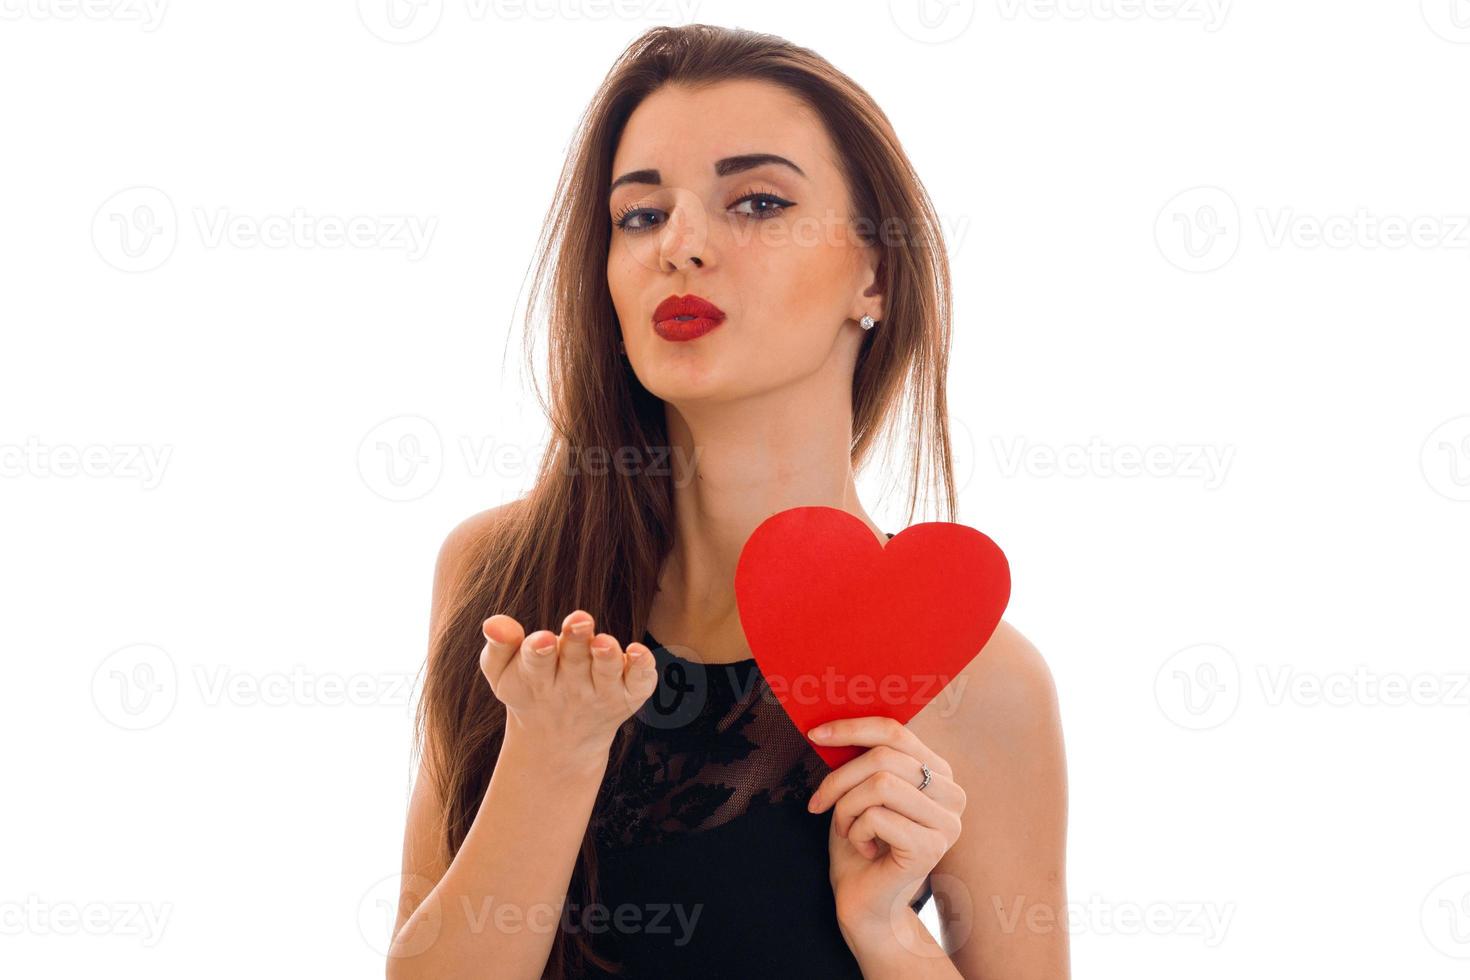 young charming woman with red lips preparing to celebrate valentines day with heart symbol in studio isolated on white background photo